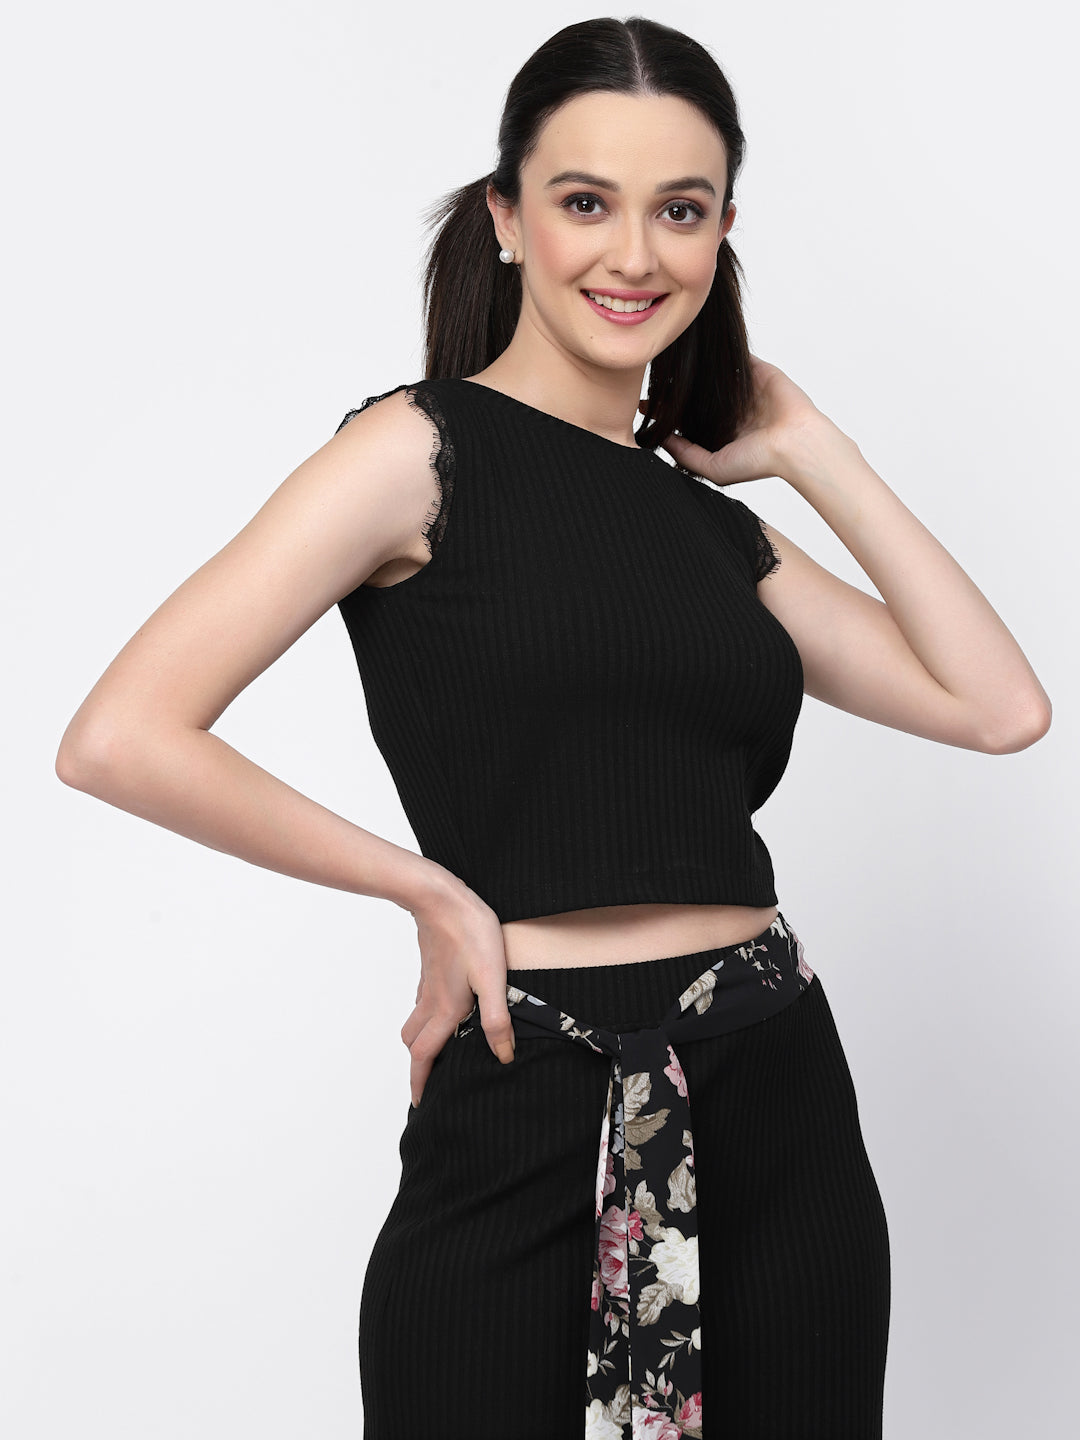 Black Knit Crop Top With Lace